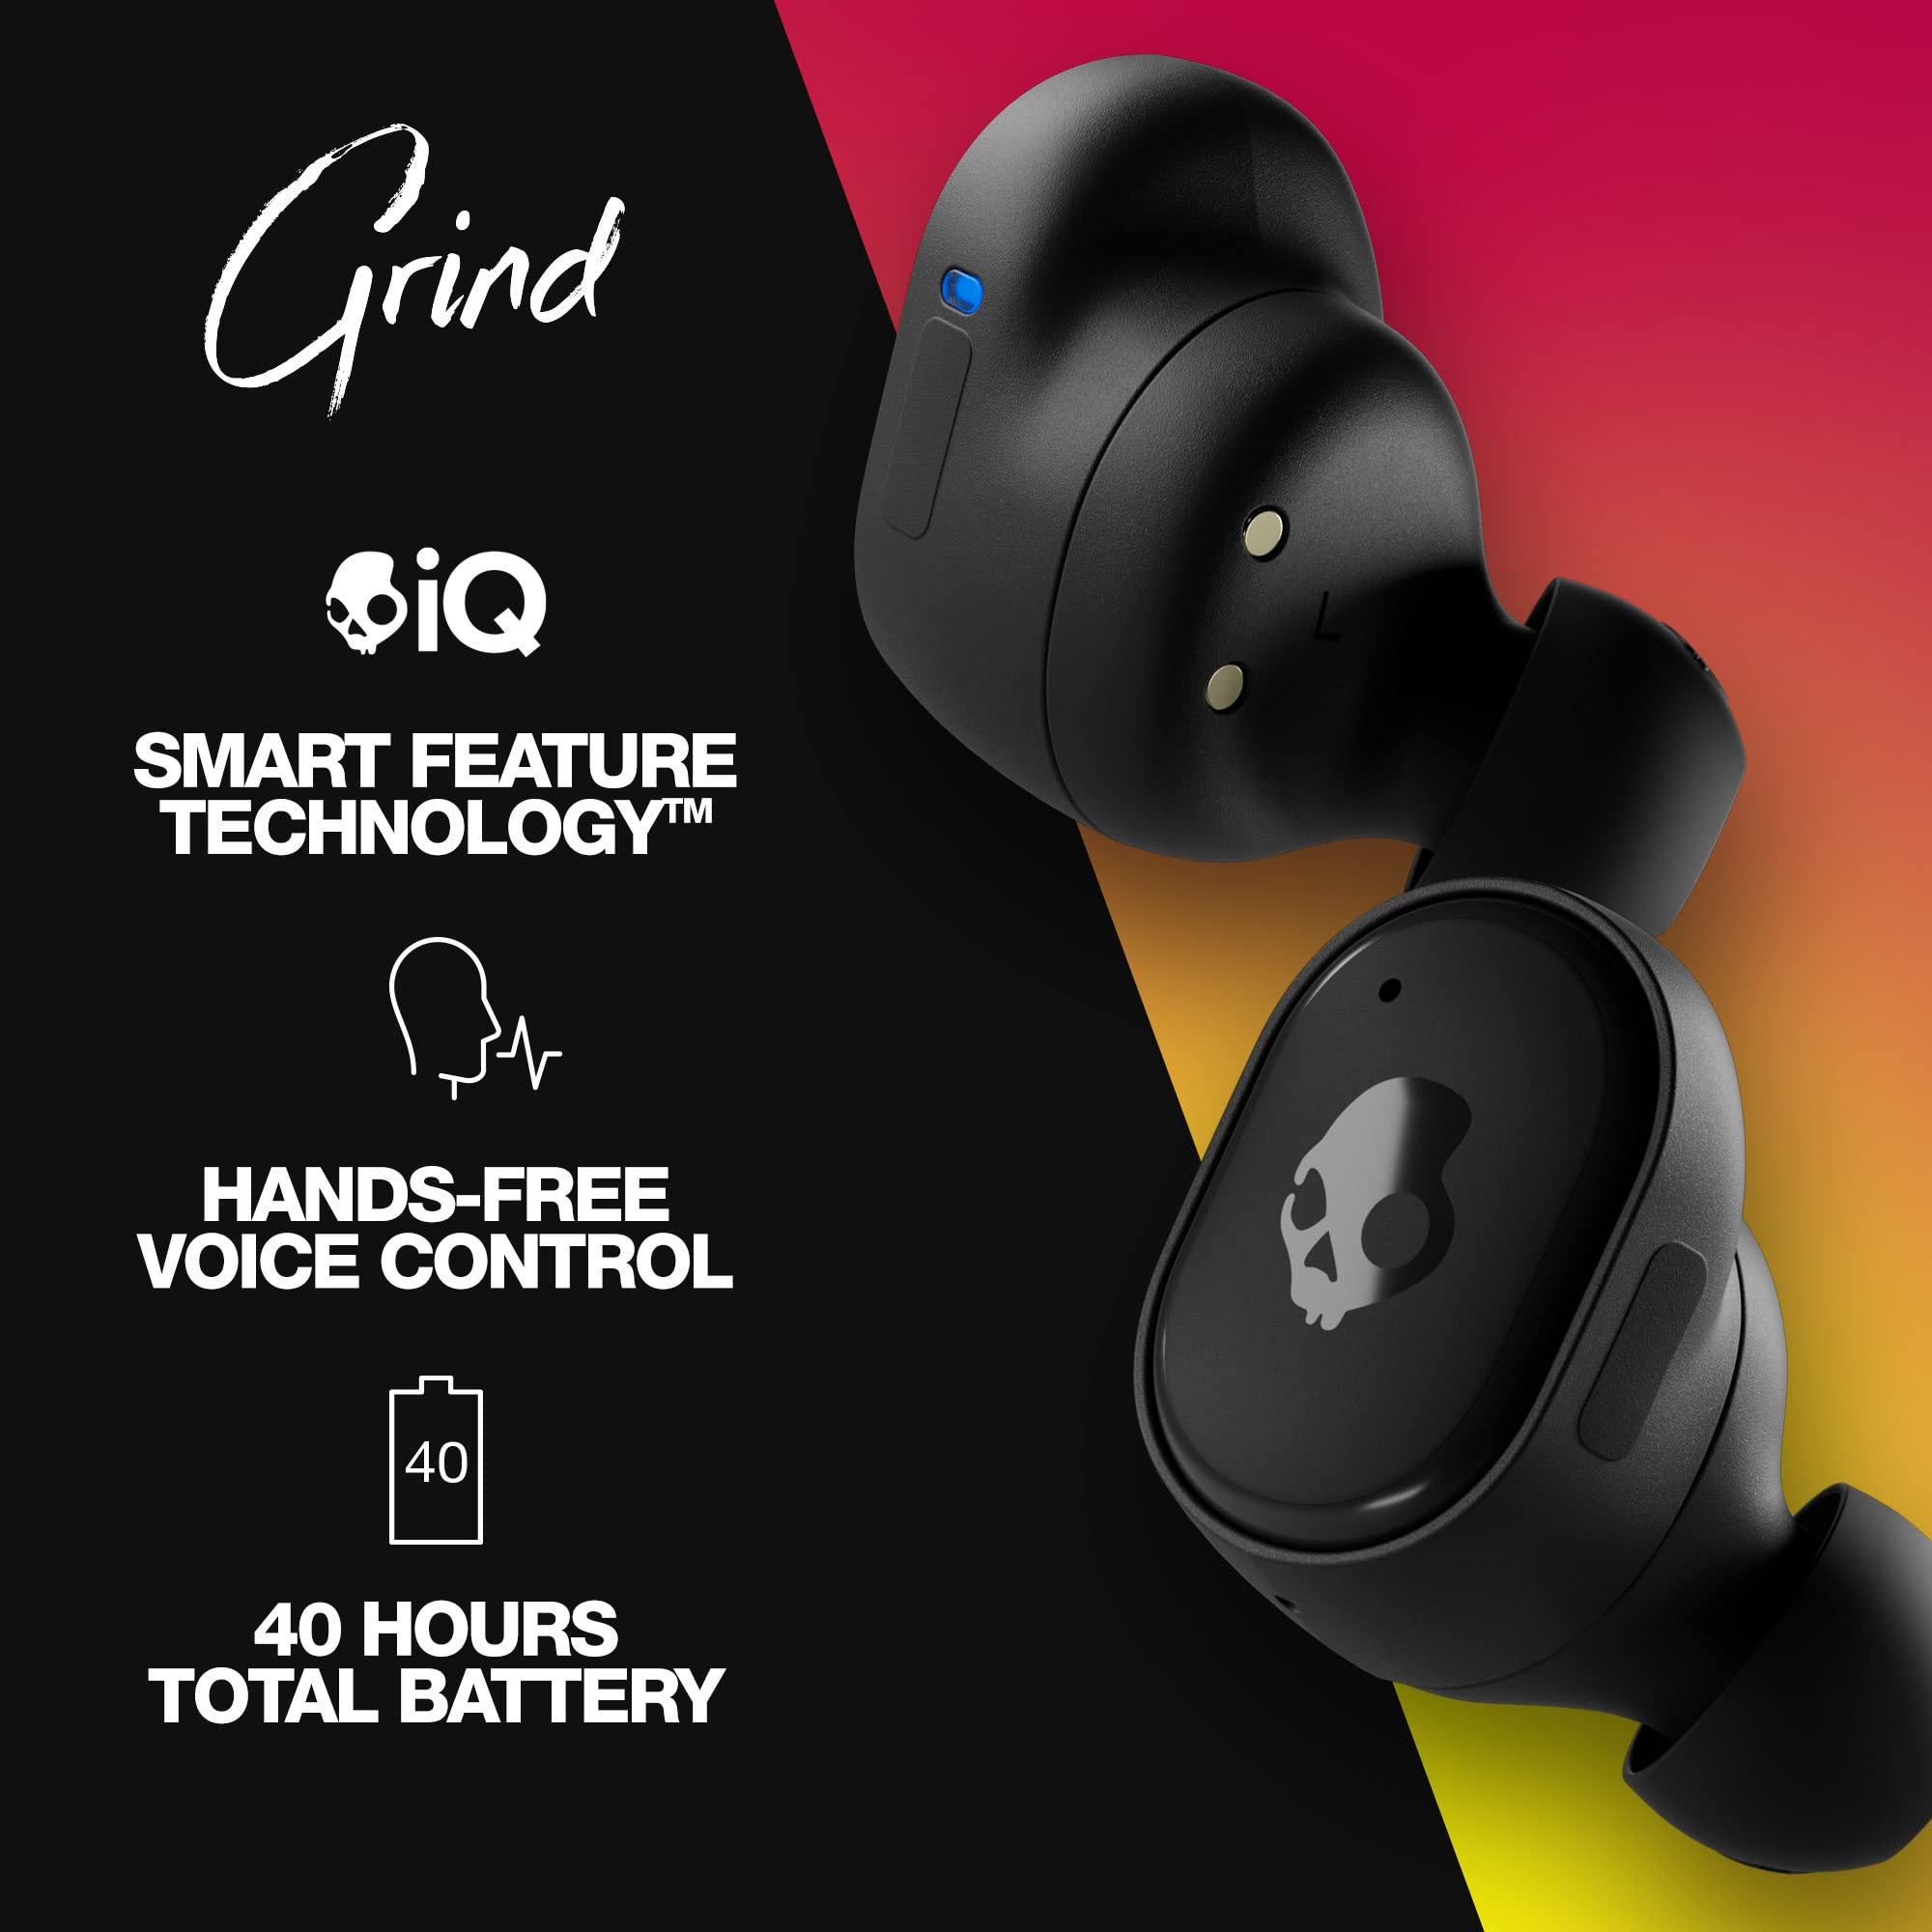 Skullcandy Grind In-Ear Wireless Earbuds, 40 Hr Battery, Microphone, Works with iPhone Android and Bluetooth Devices - Black